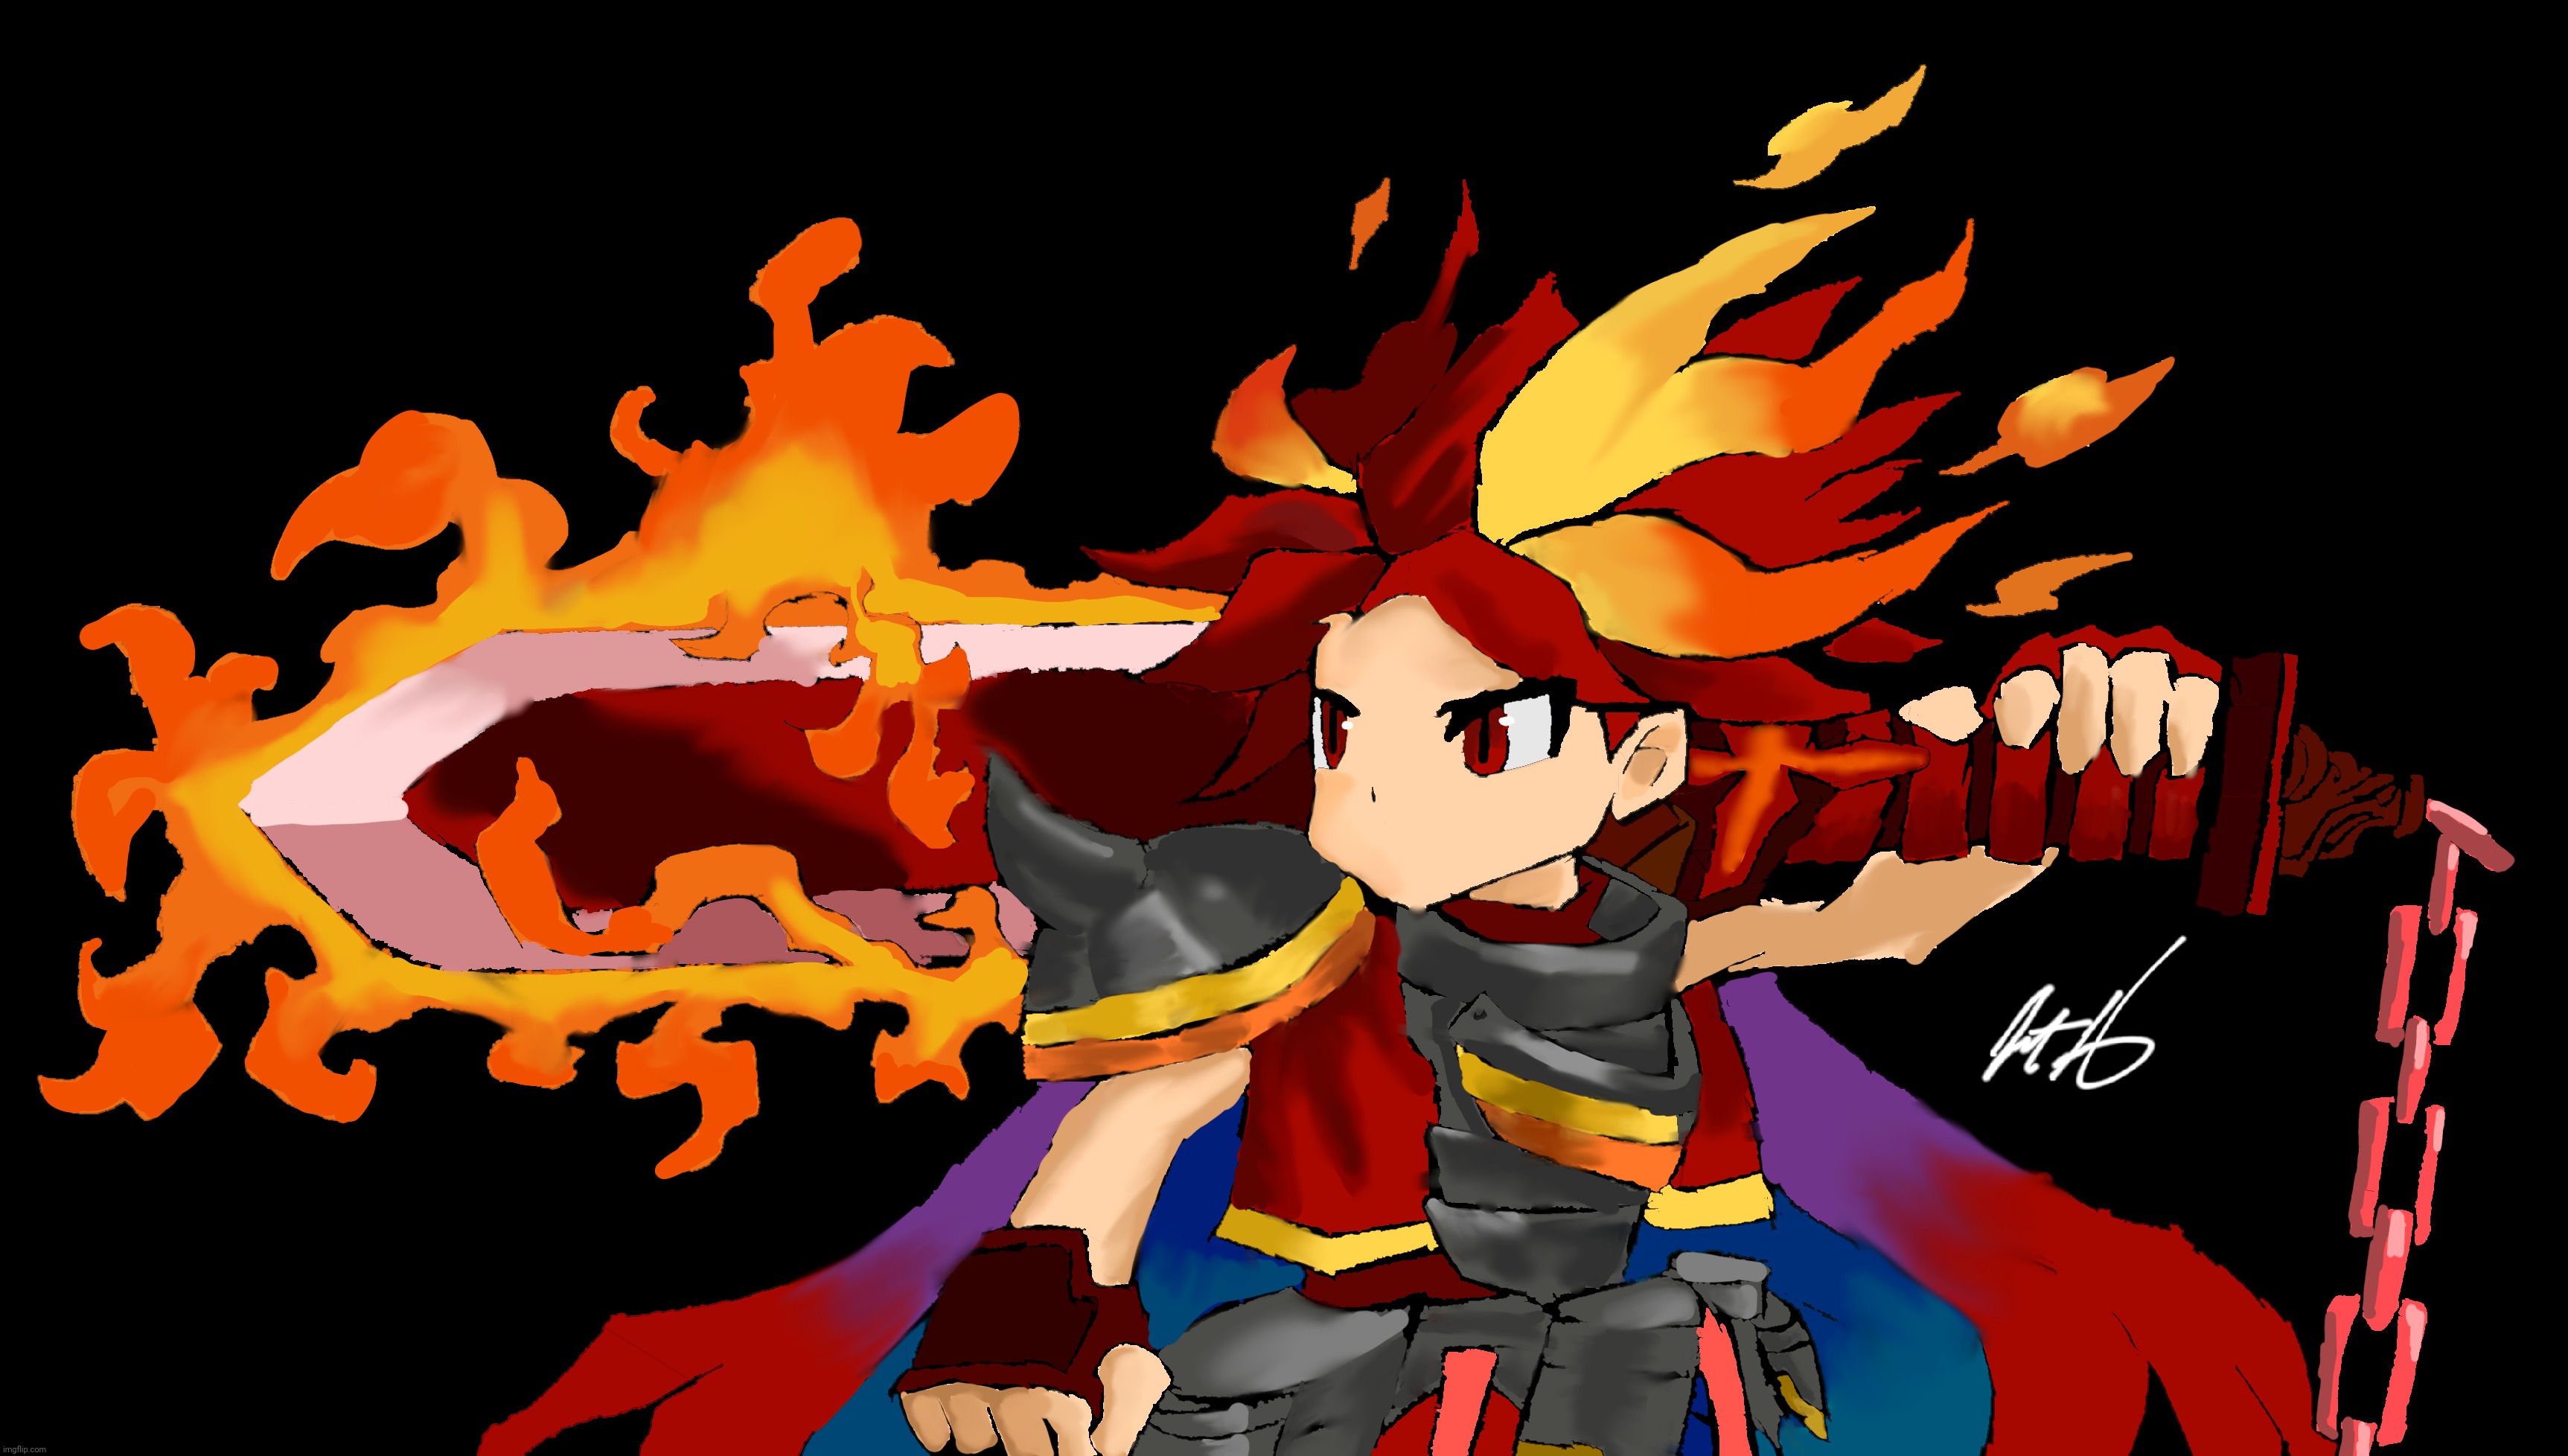 Fire King Vargas | image tagged in brave frontier,drawing,digital art | made w/ Imgflip meme maker